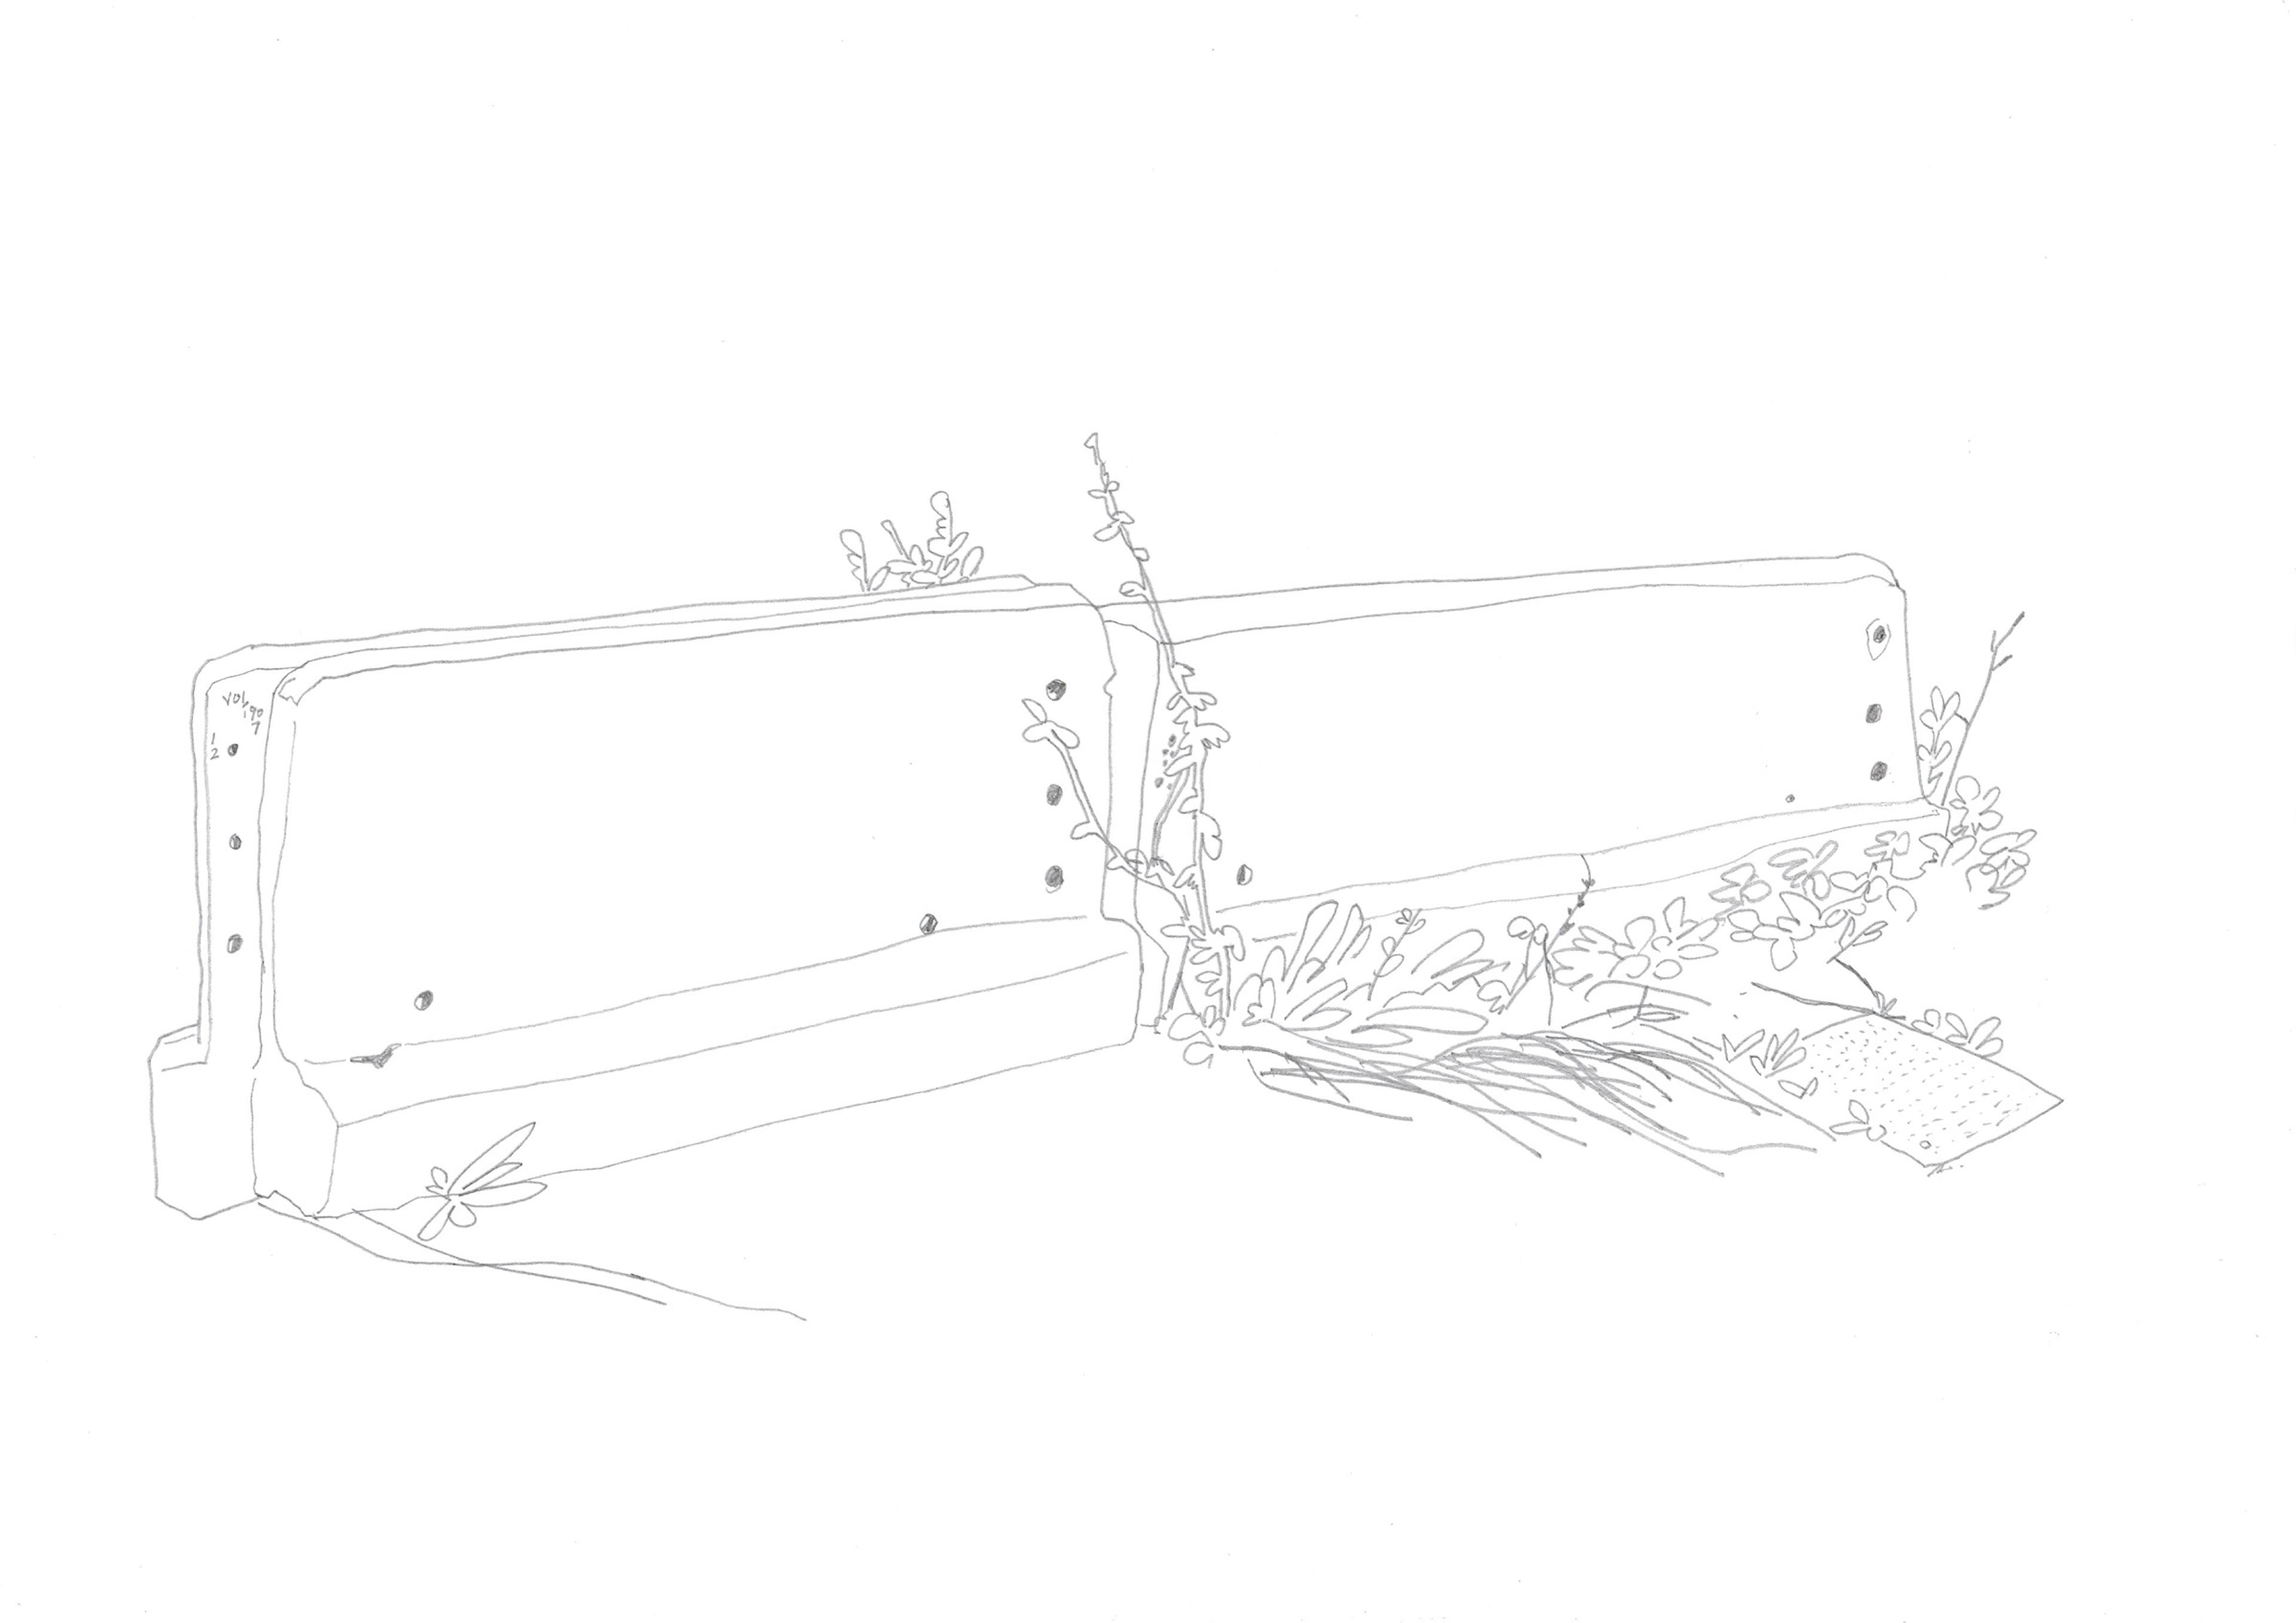 Pencil drawing of concrete blocks with plants growing through them